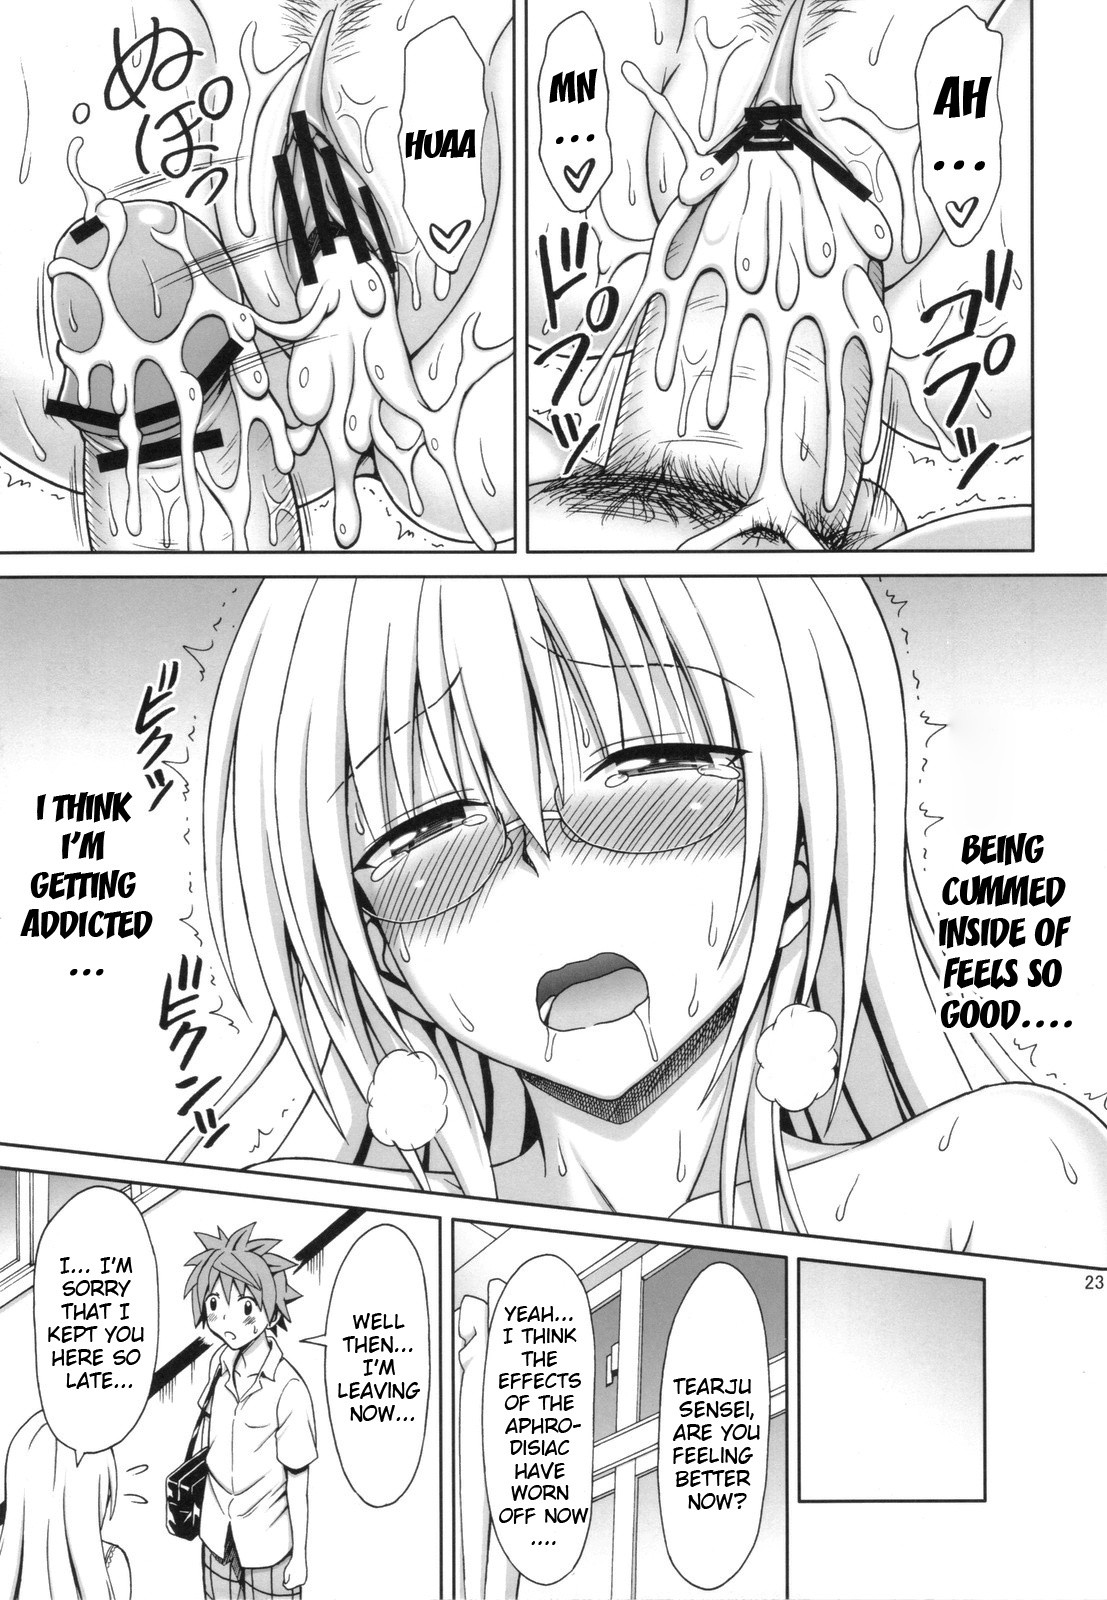 After-School Trouble hentai manga picture 22